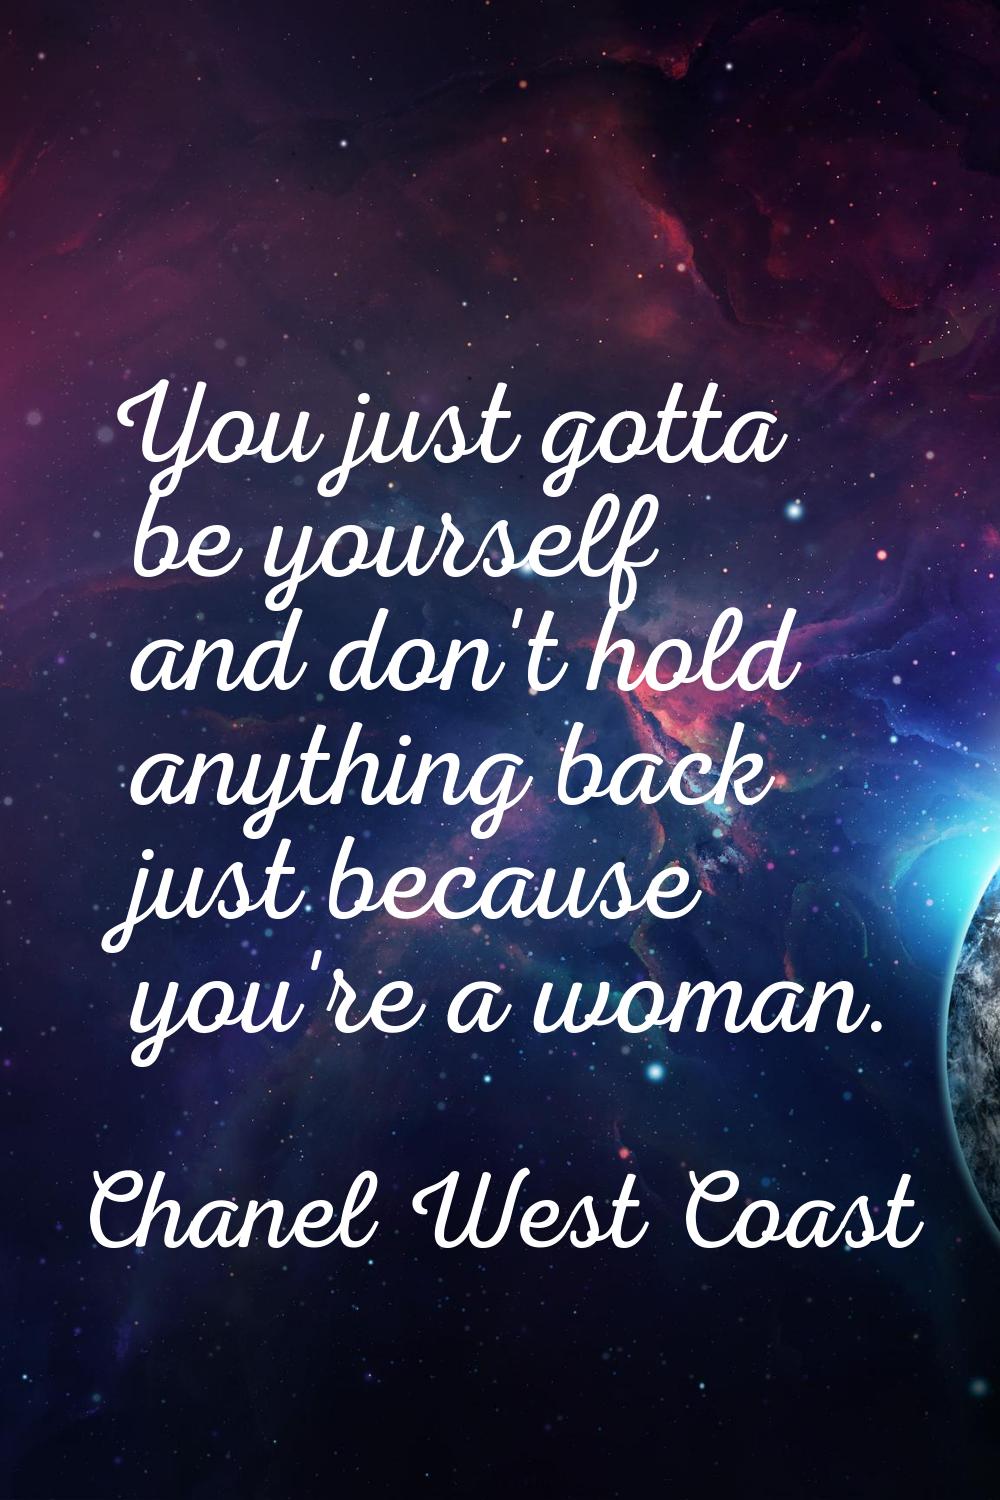 You just gotta be yourself and don't hold anything back just because you're a woman.